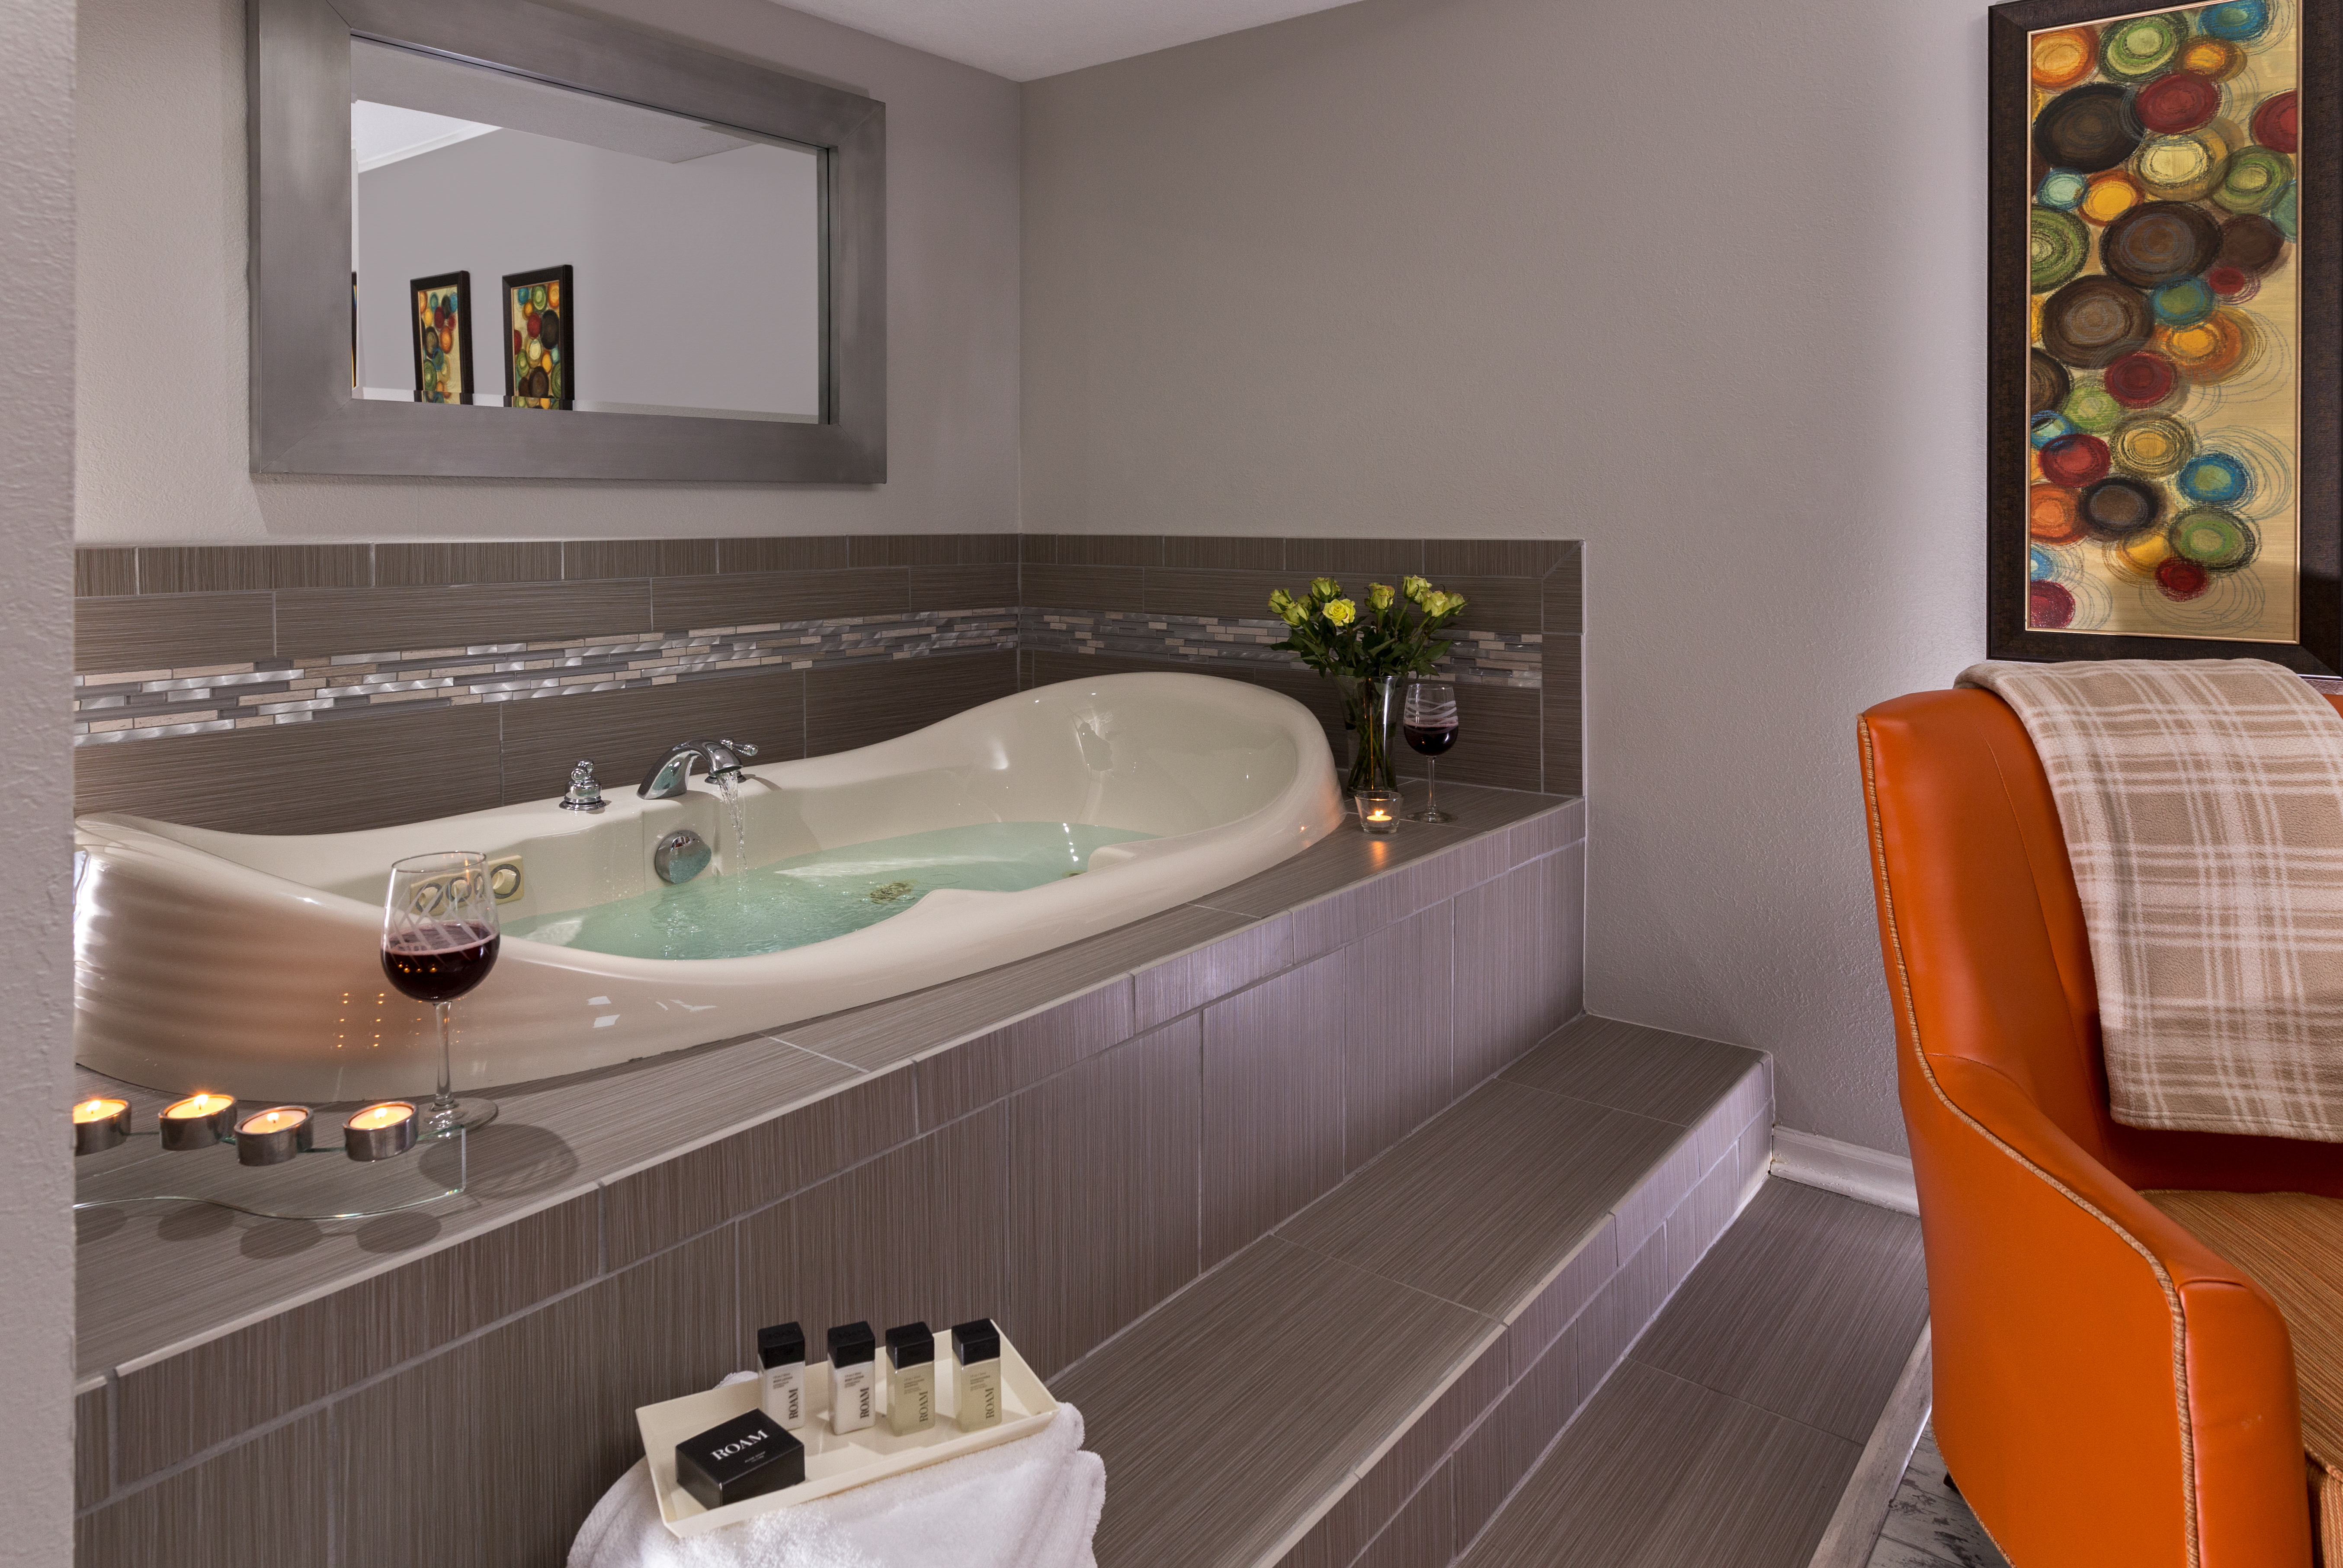 In-room jacuzzi tub